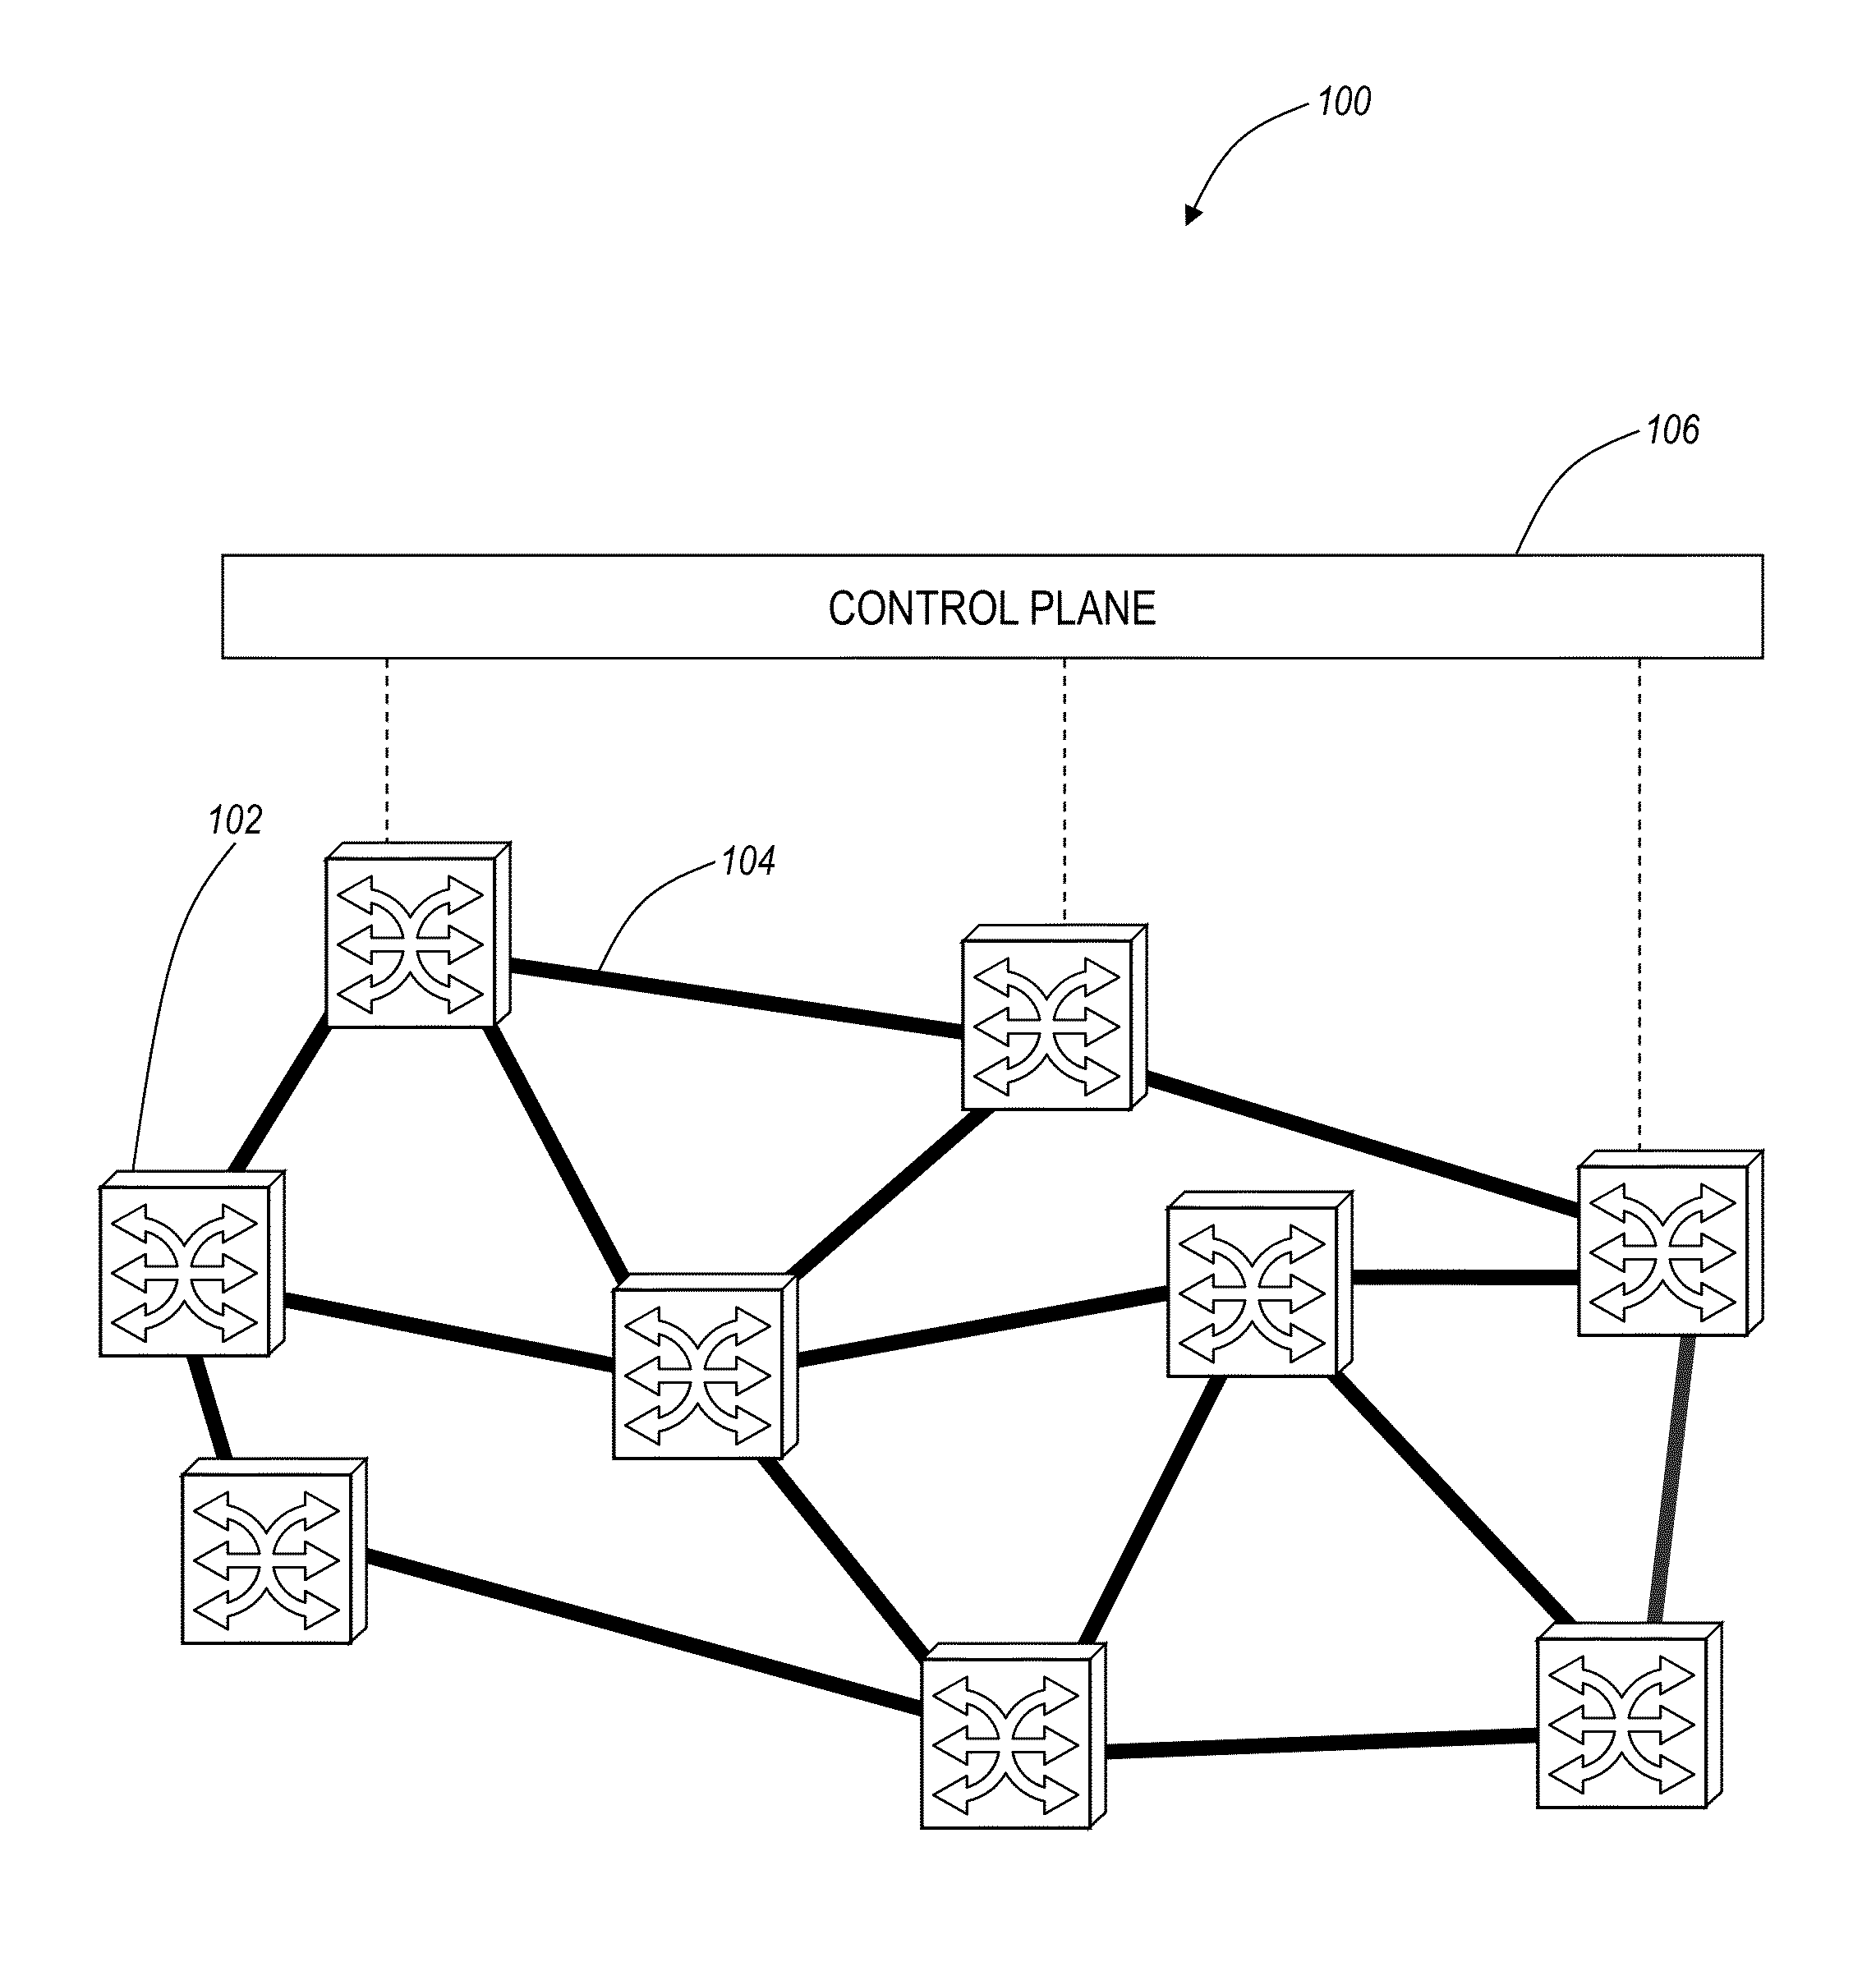 Coherent probe and optical service channel systems and methods for optical networks